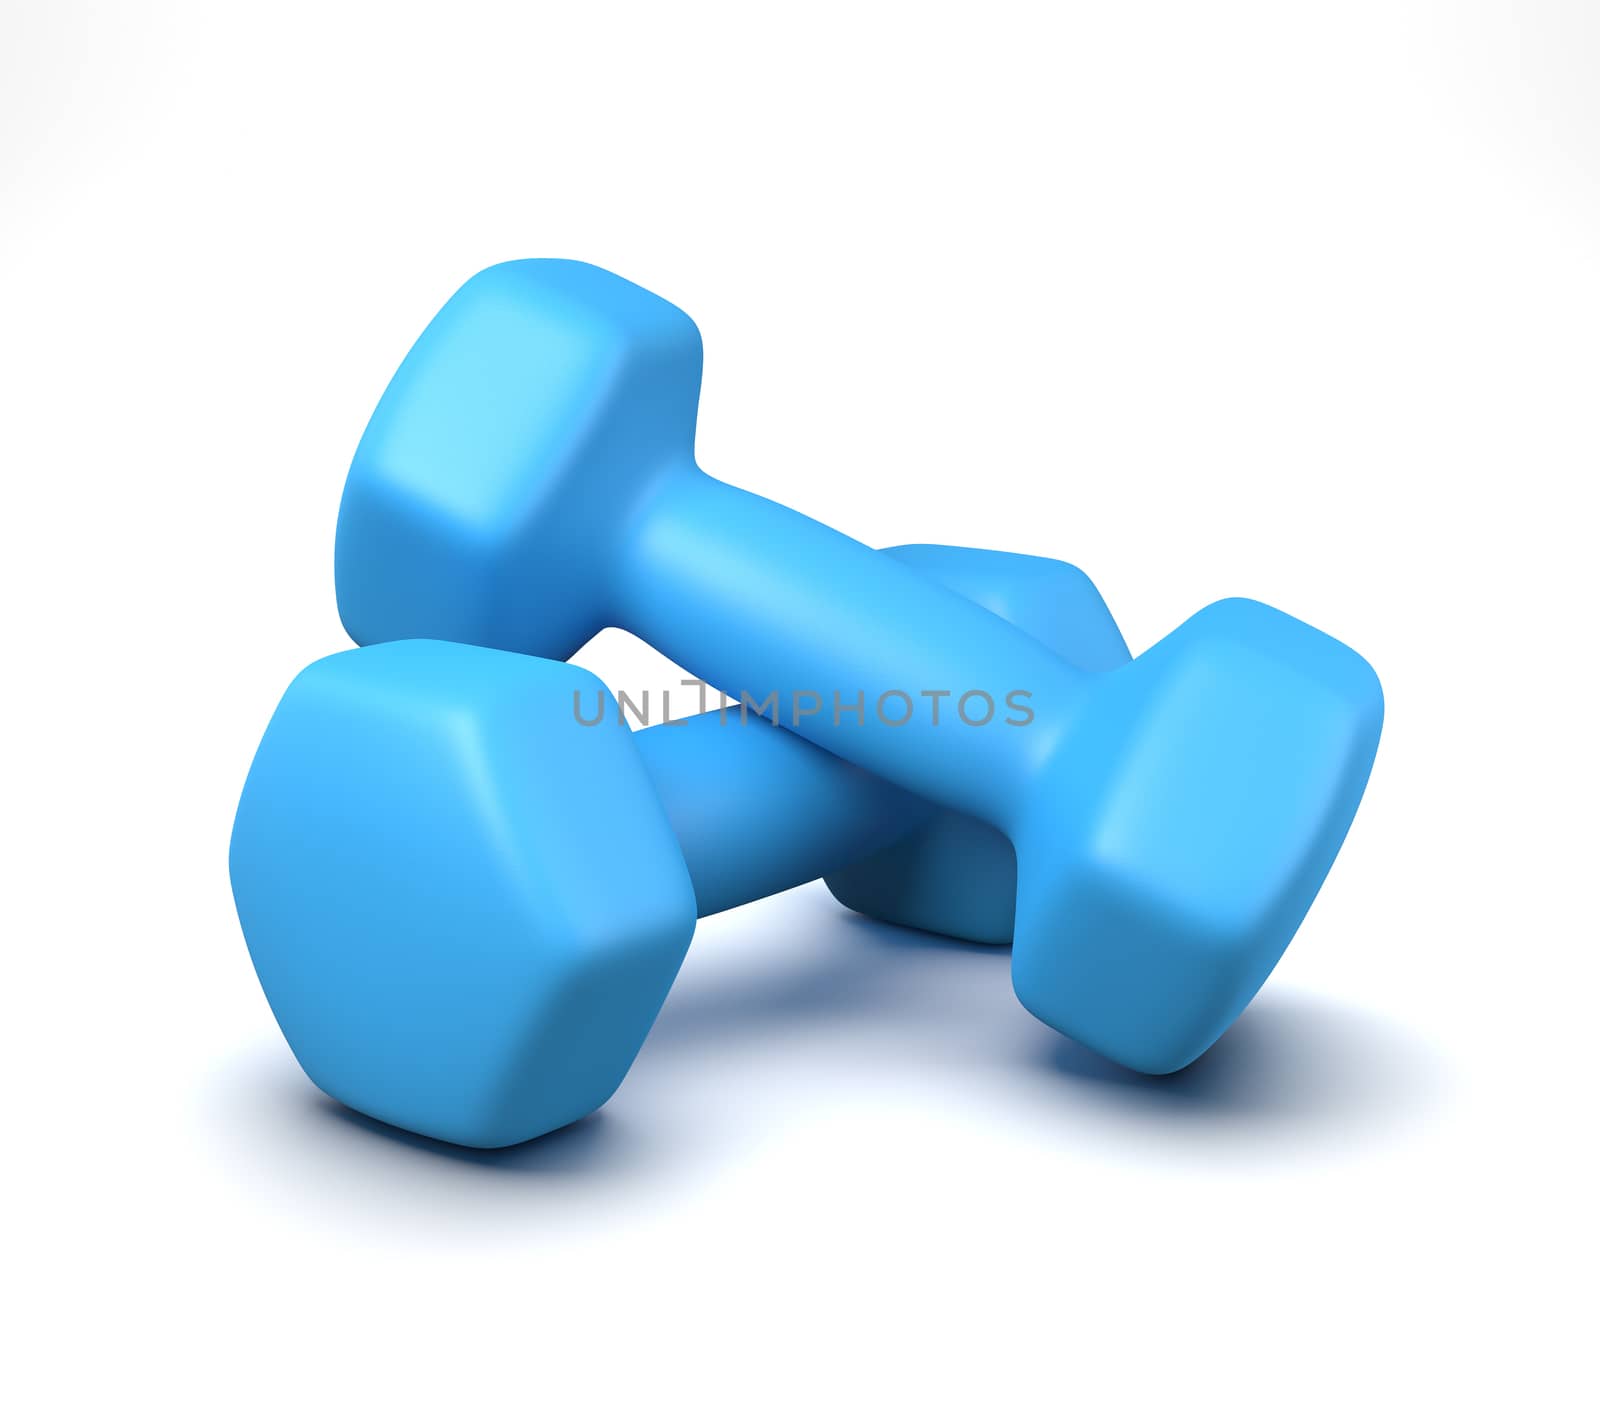 A Pair of Blue Gym Weights Isolated on White Background 3D Illustration